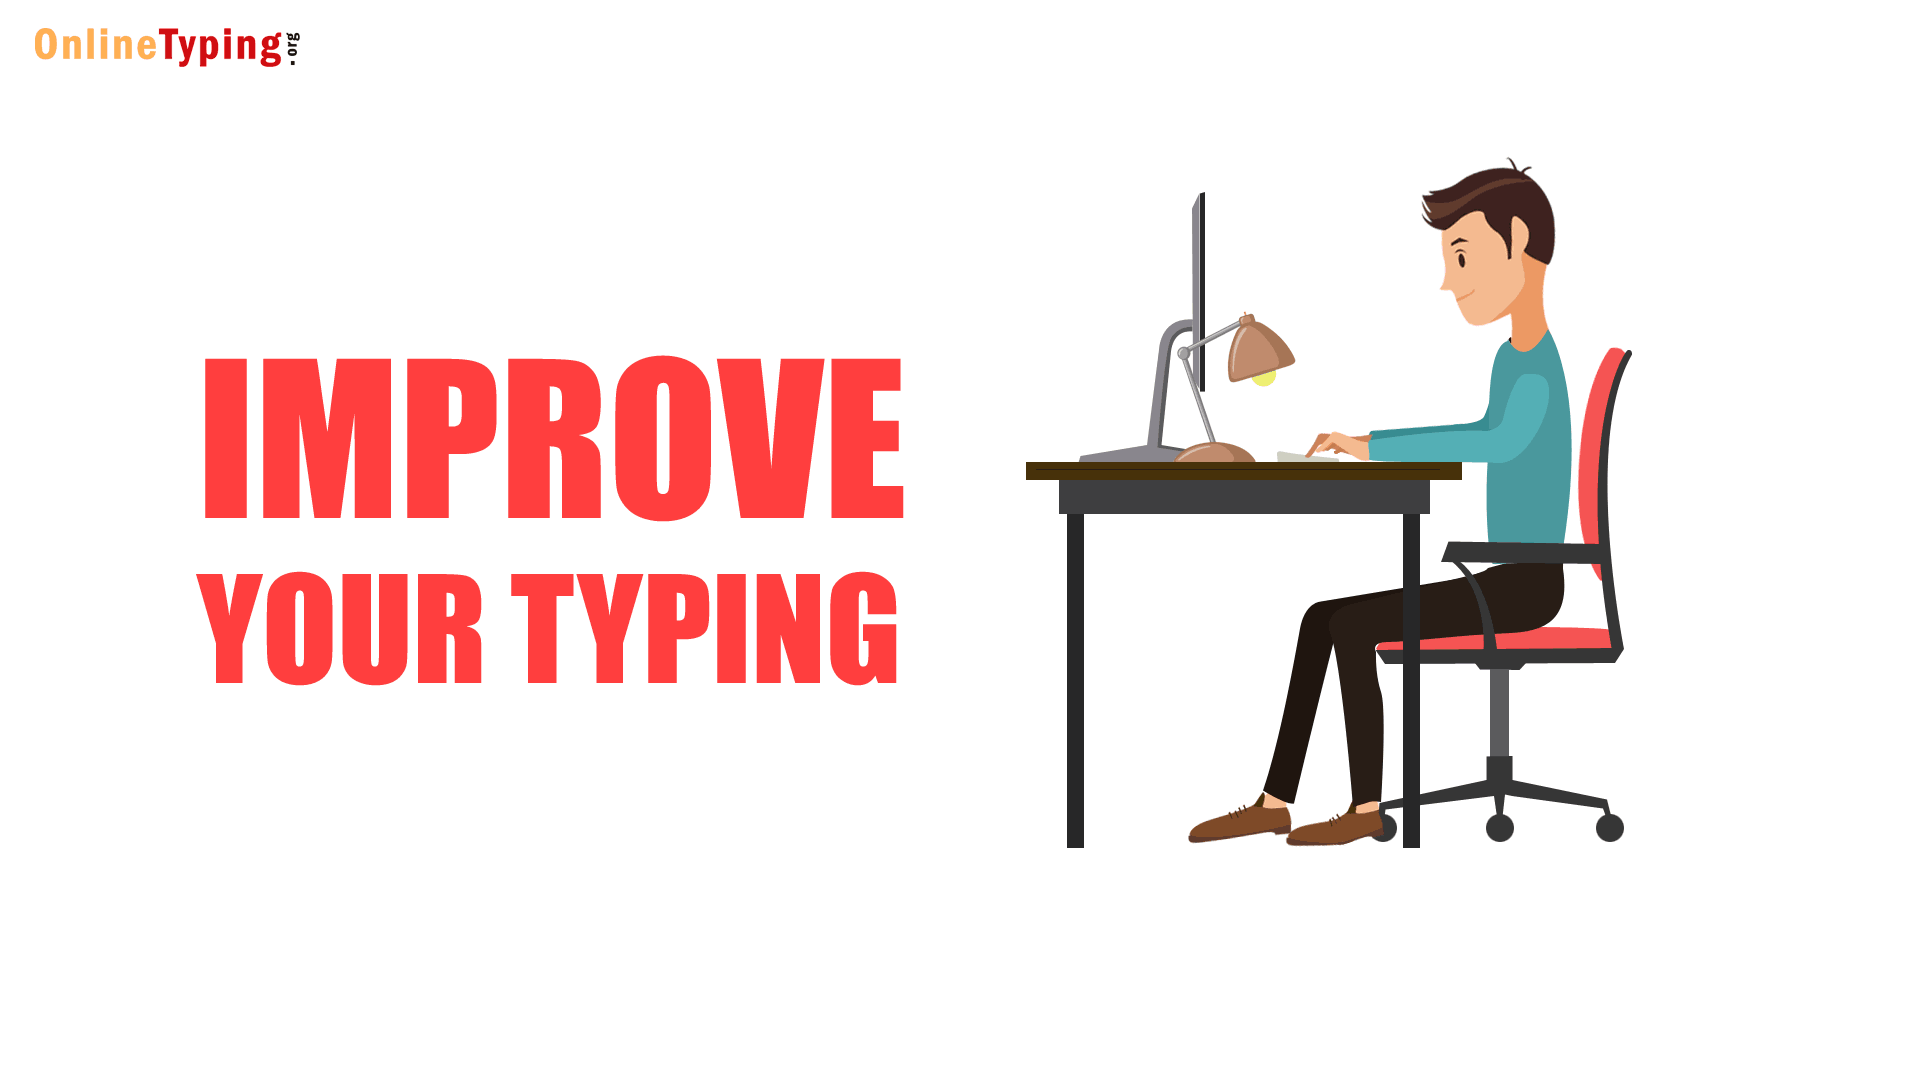 (c) Onlinetyping.org